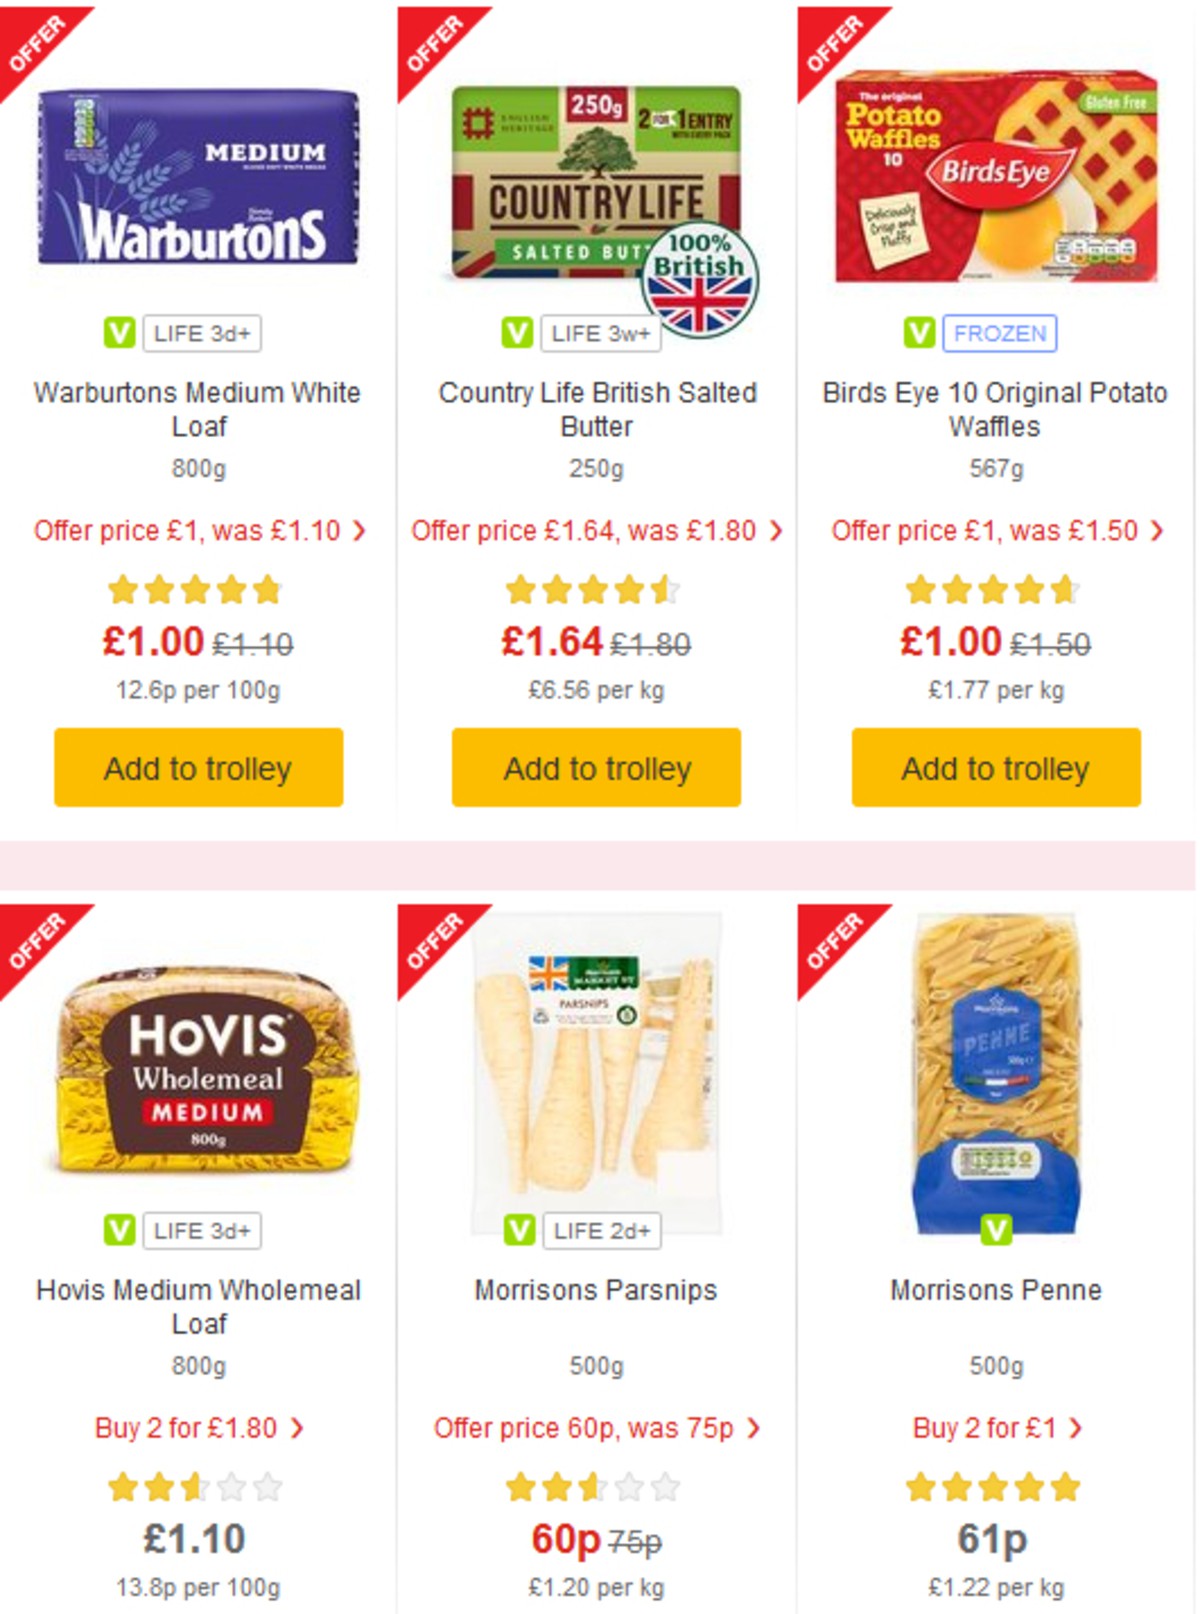 Morrisons Offers from 26 March